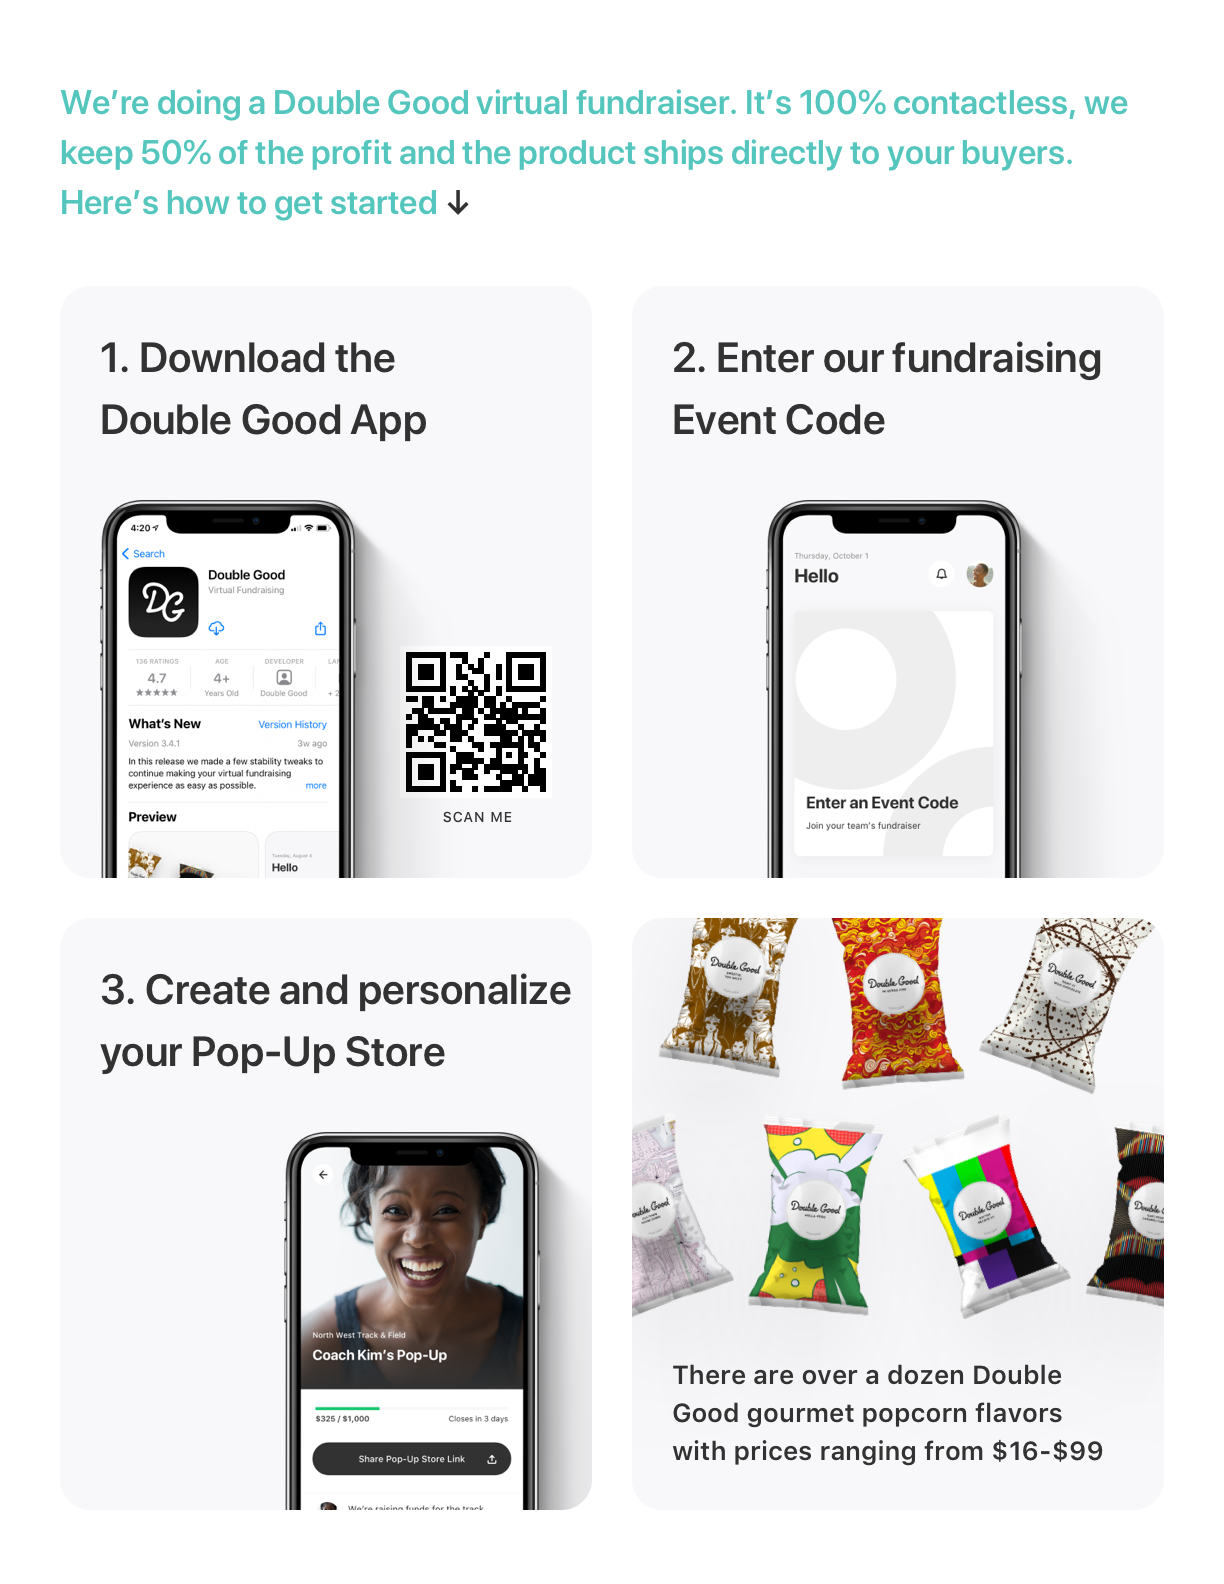 Double Good Fundraising - Learn how it works